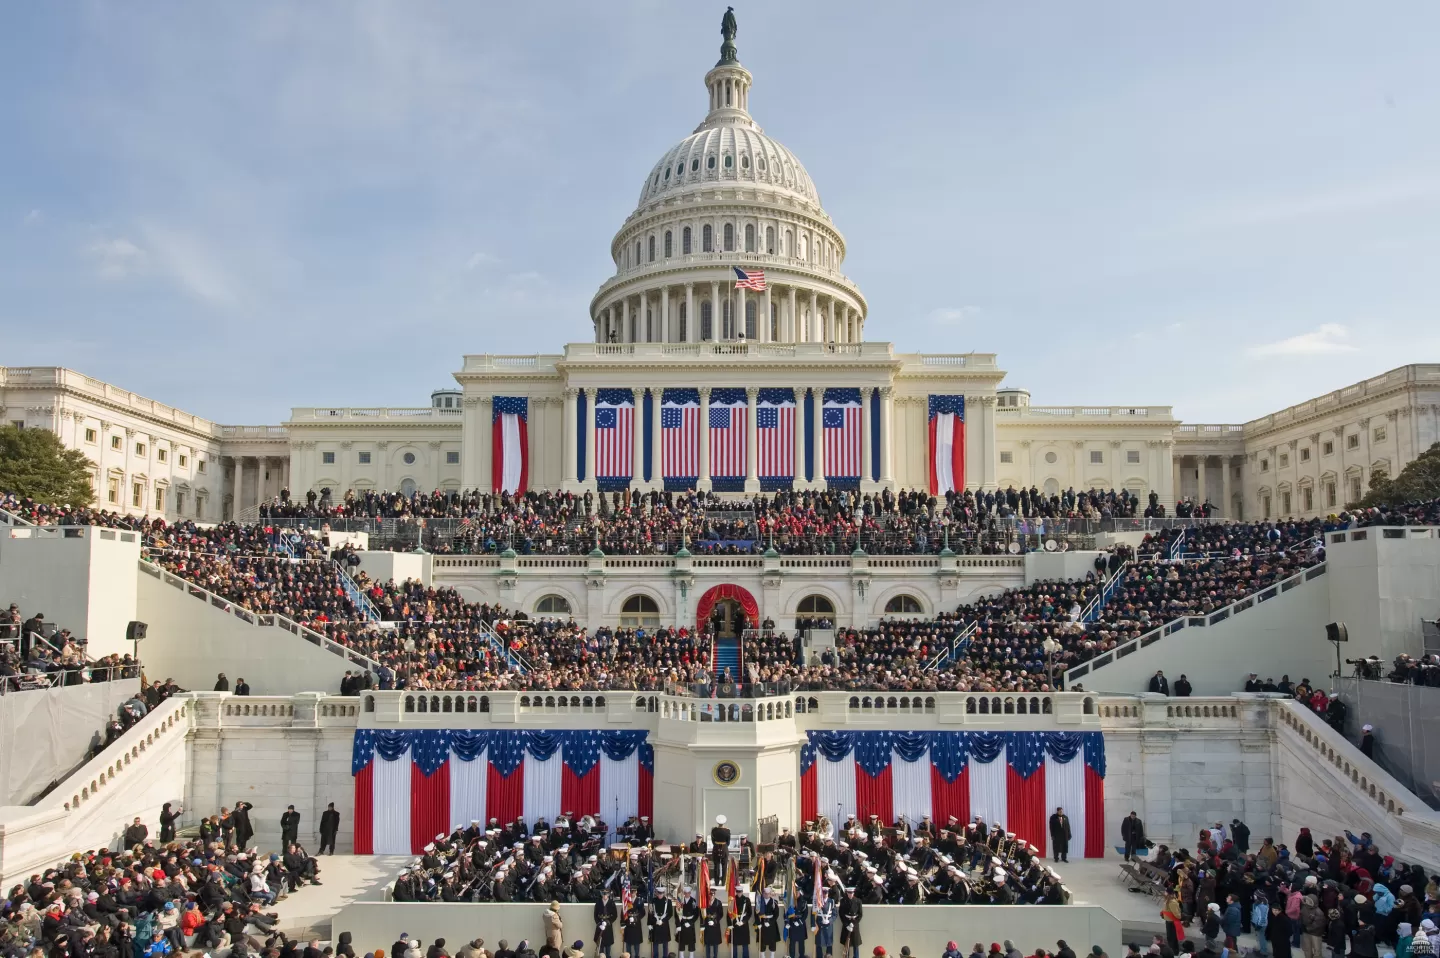 The U.S. Capitol with flags for a presidential inauguration.